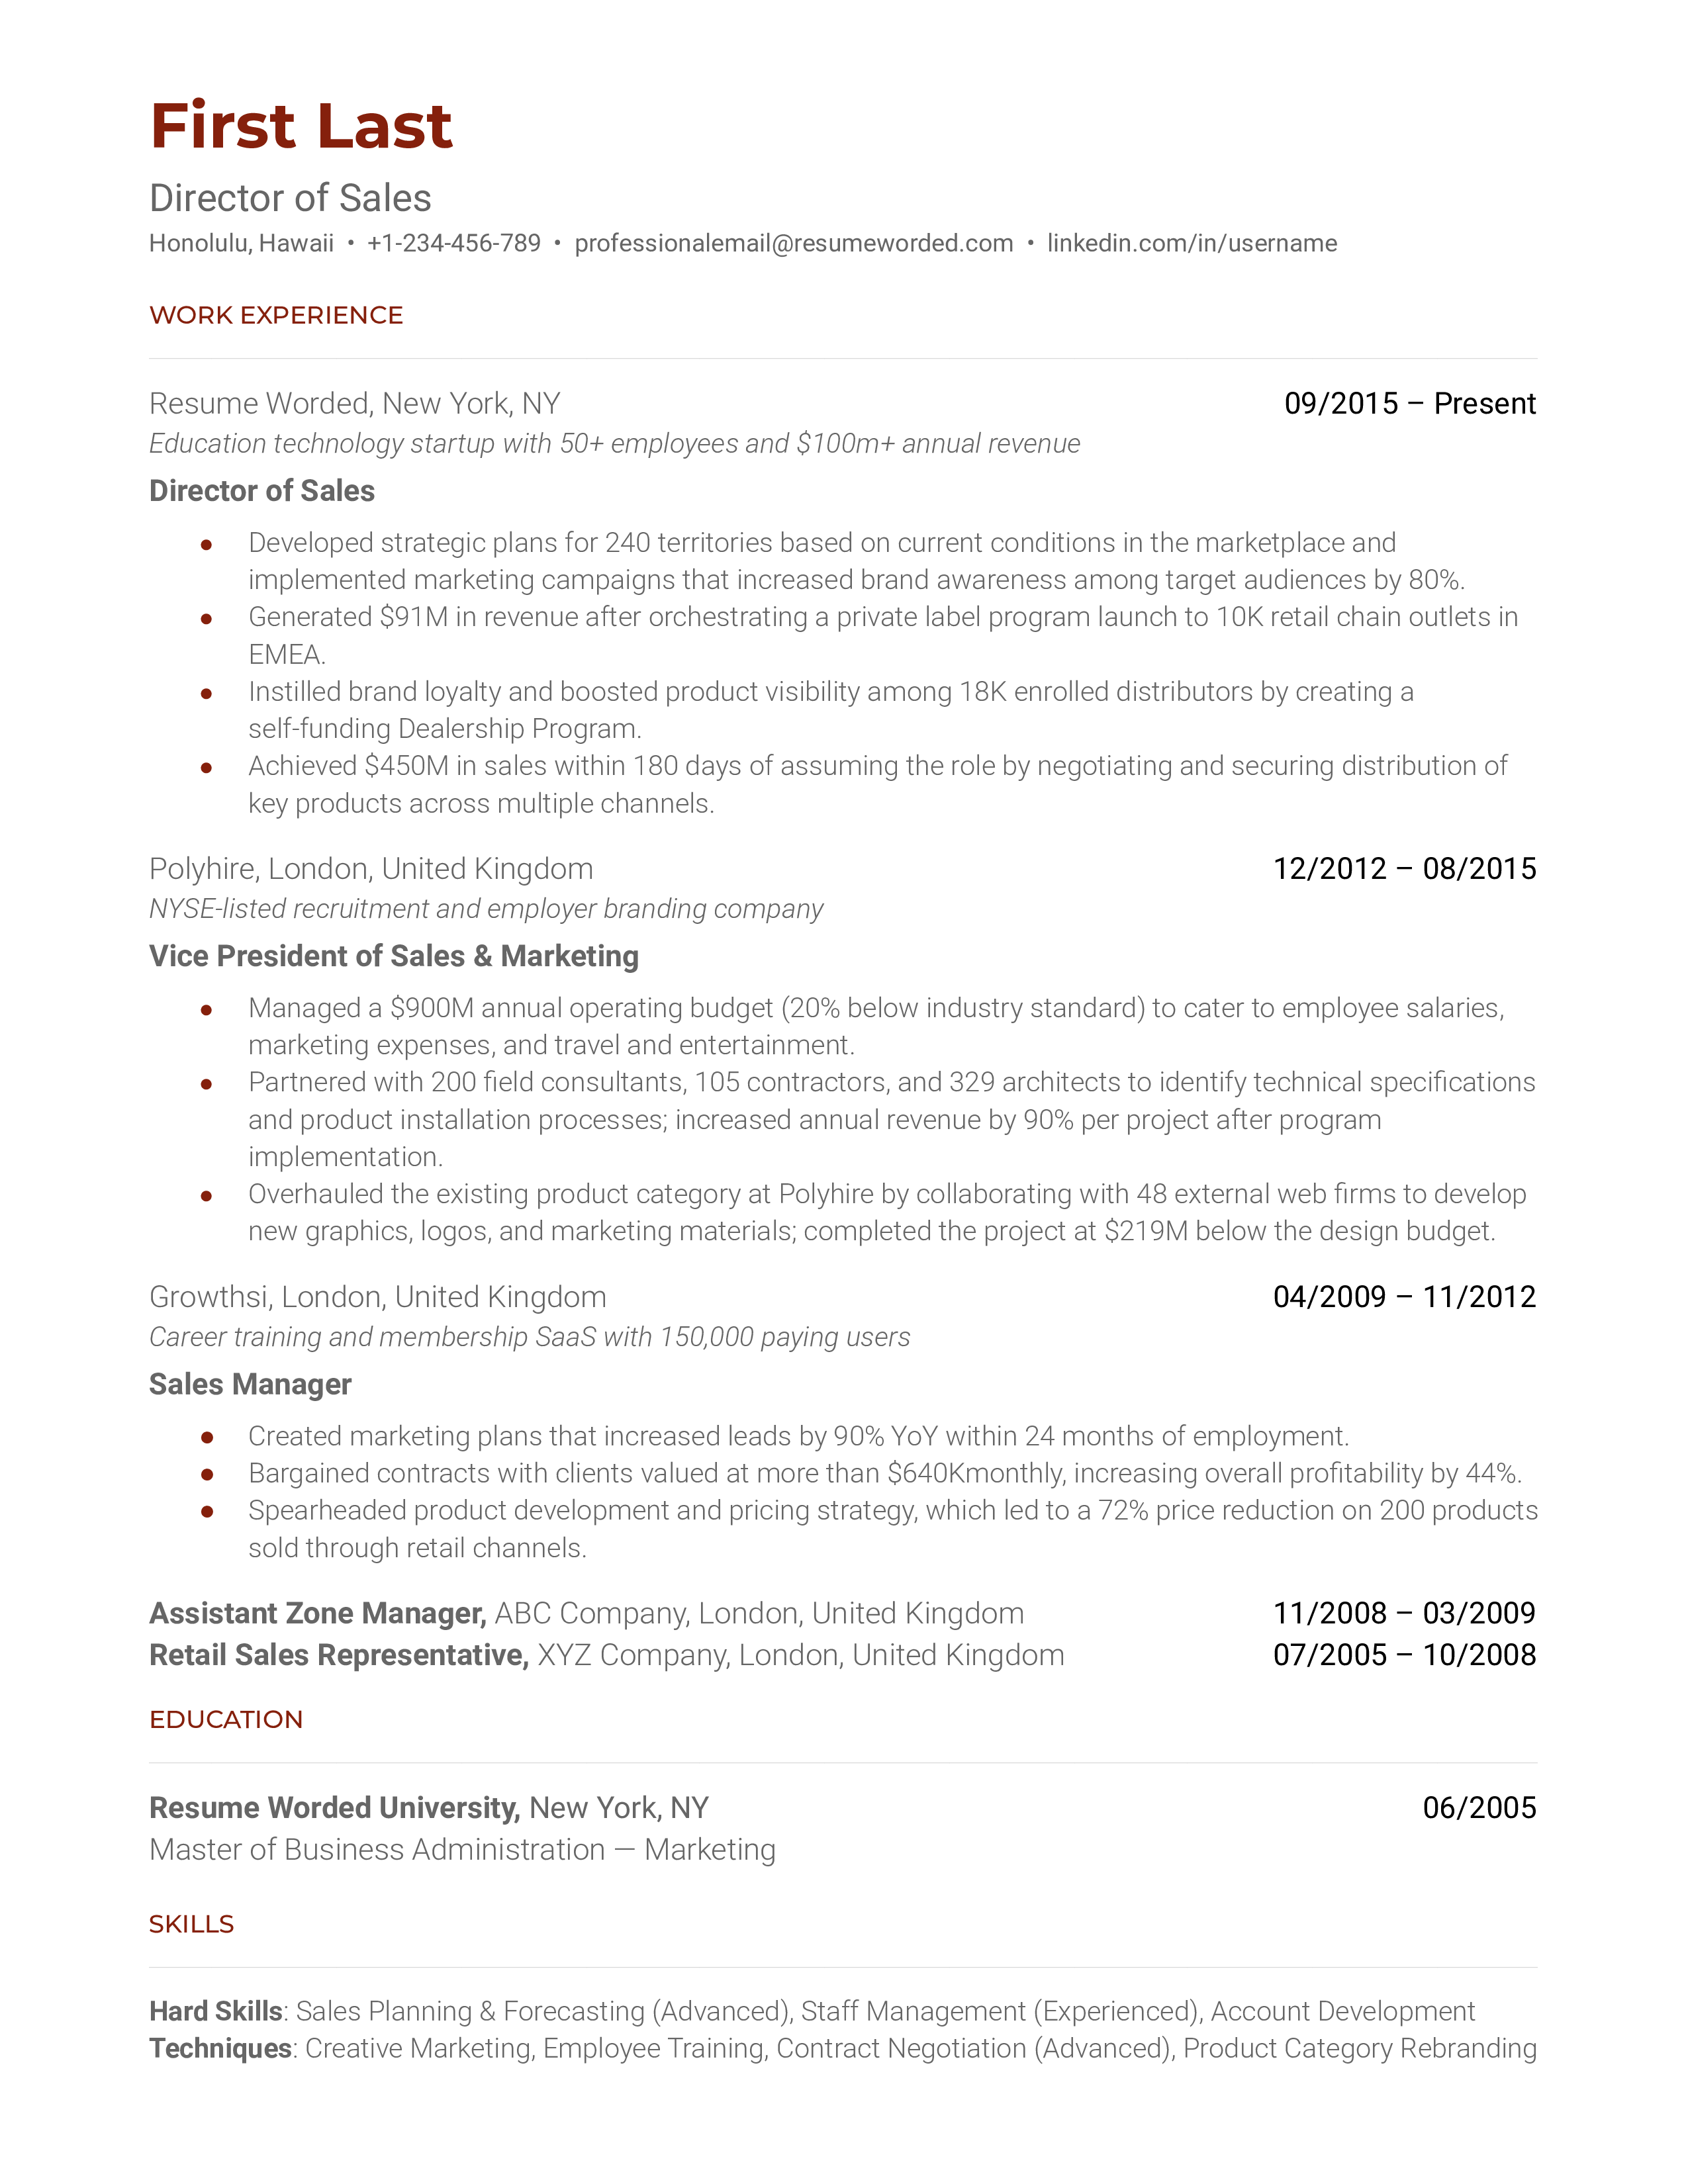 A director of sales resume template that organizes work experience in chronological order